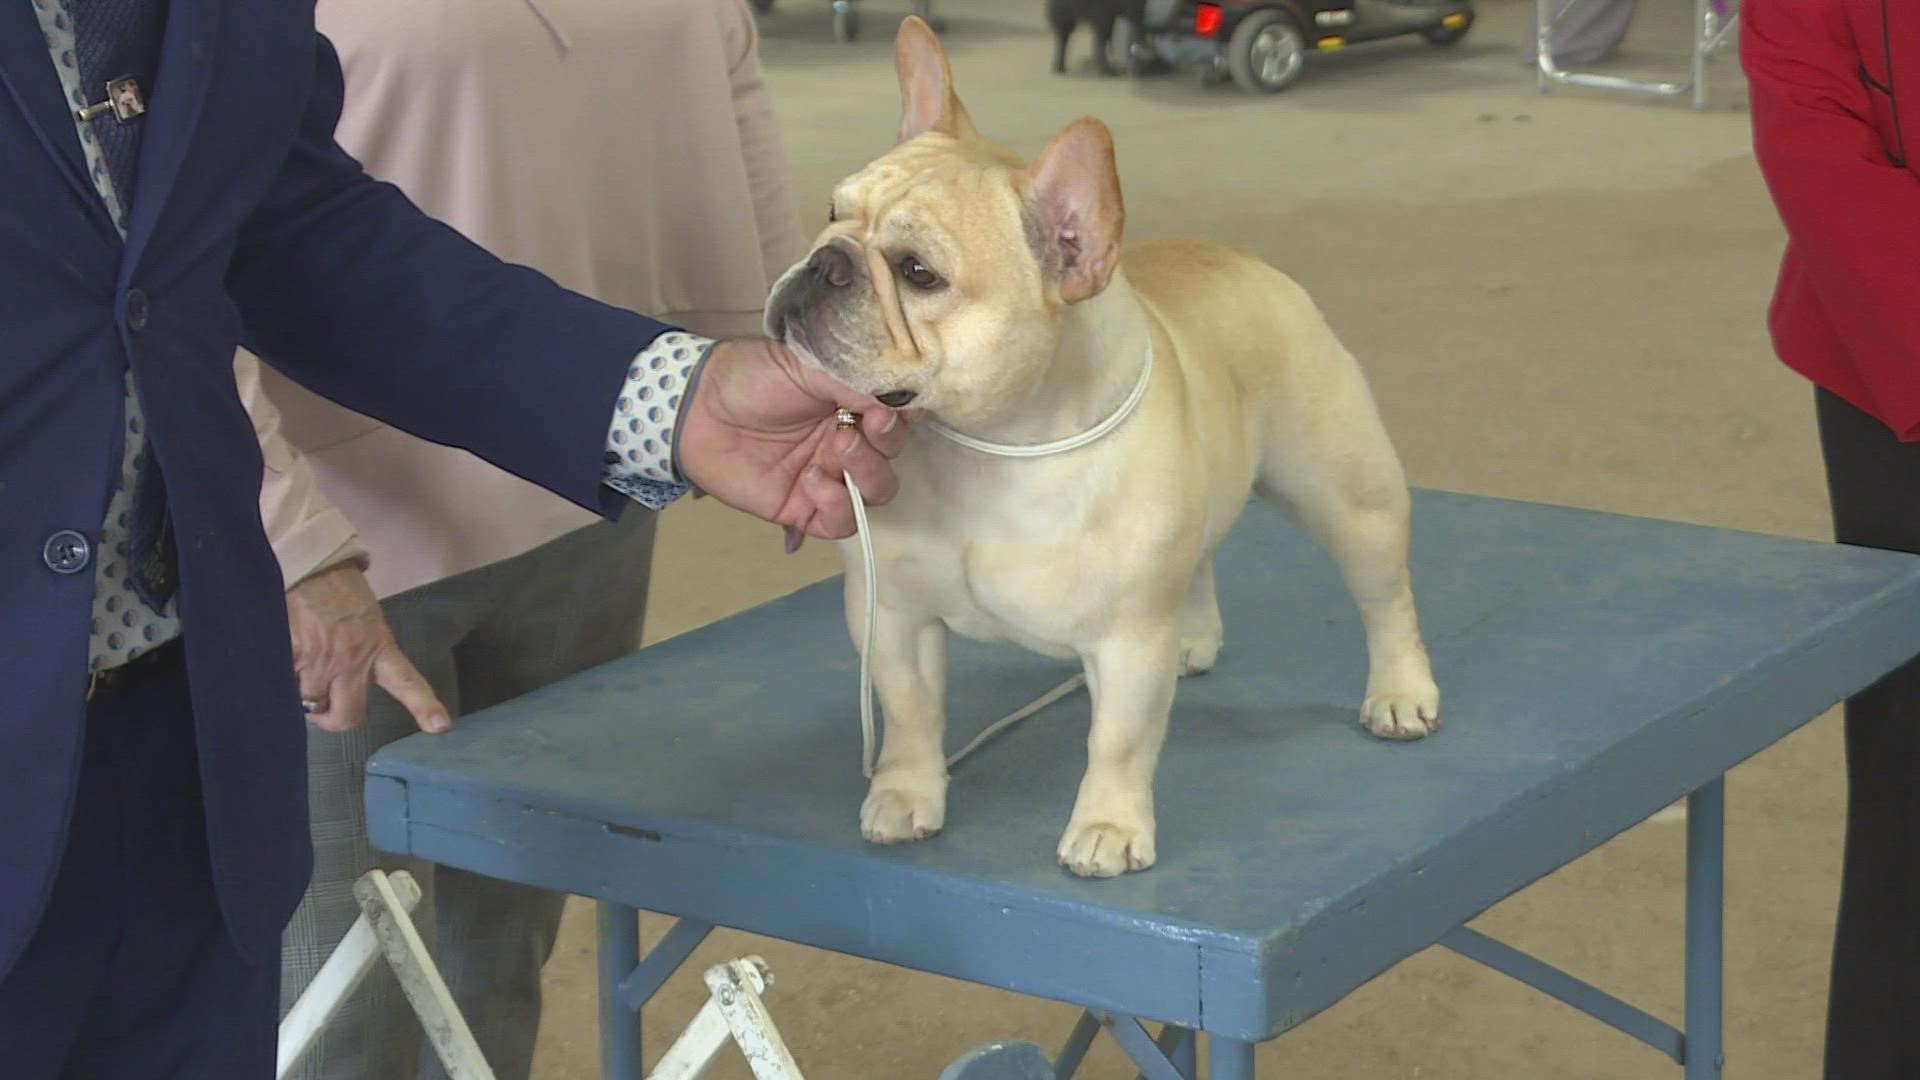 Winston the French Bulldog recently won the National Dog Show and just made a stop in Scottsdale to compete in the Fiesta Dog Show. Which he won too.